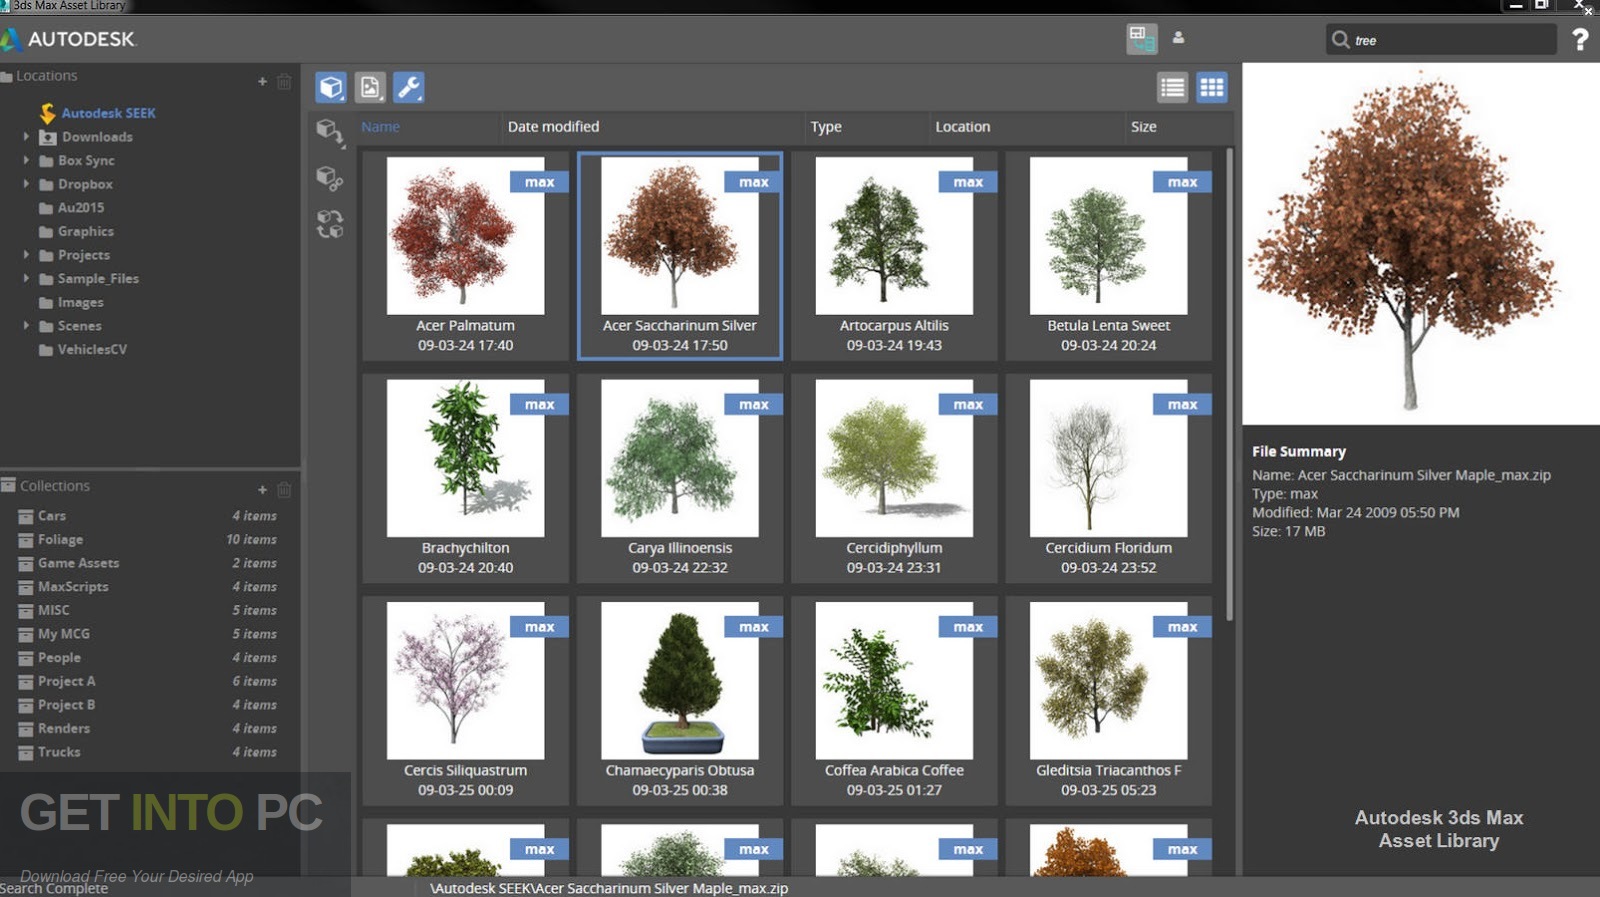 vray 3 for 3ds max 2014 64 bit free download with crack